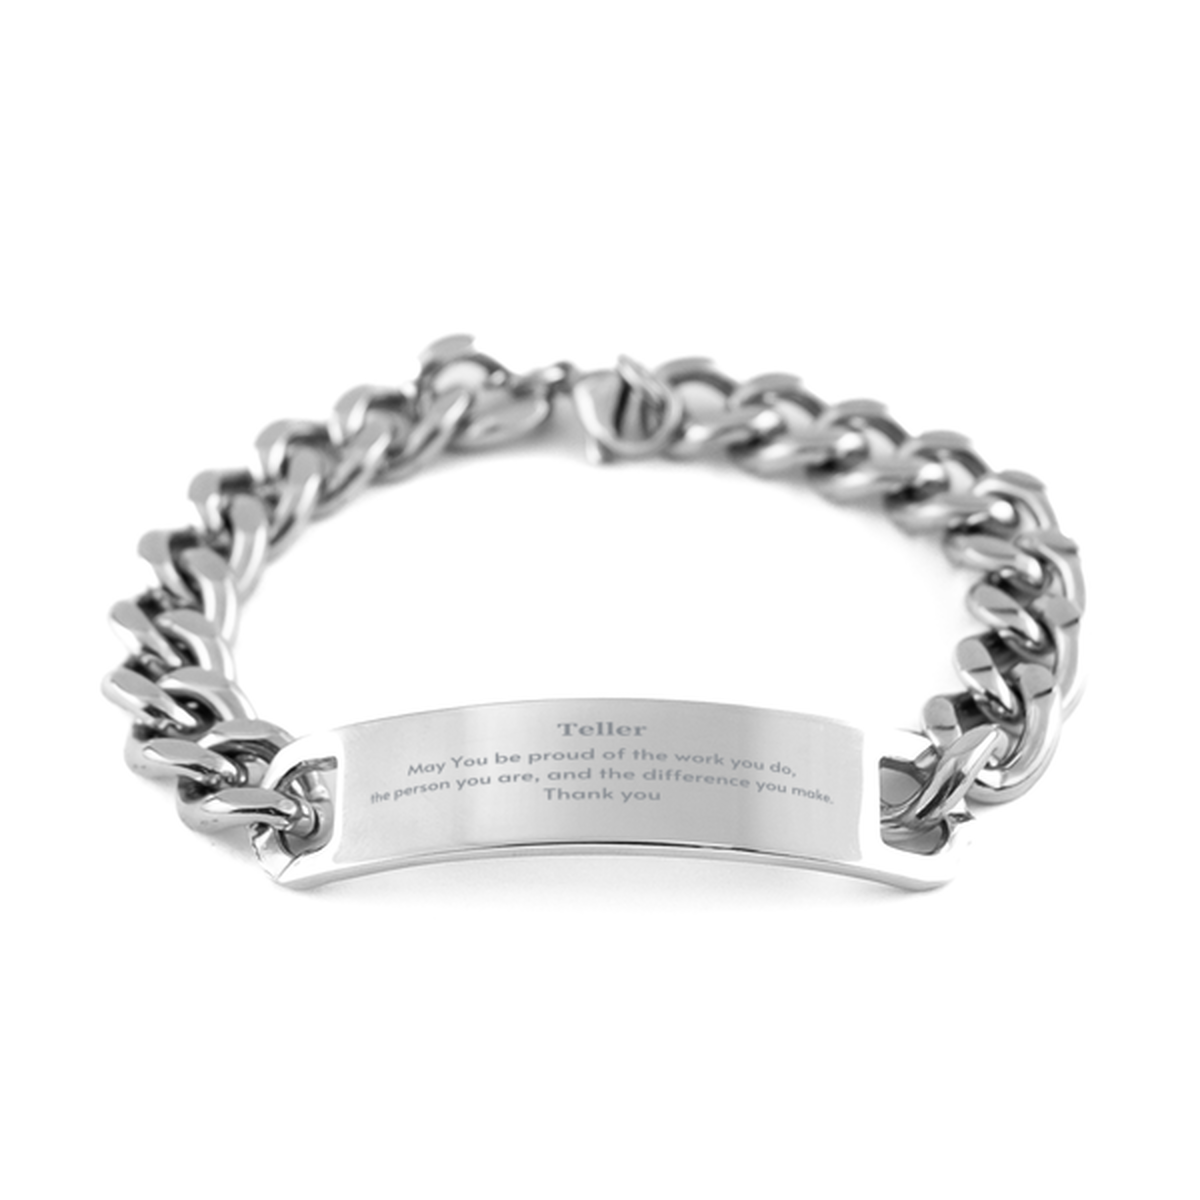 Heartwarming Cuban Chain Stainless Steel Bracelet Retirement Coworkers Gifts for Teller, Teller May You be proud of the work you do, the person you are Gifts for Boss Men Women Friends